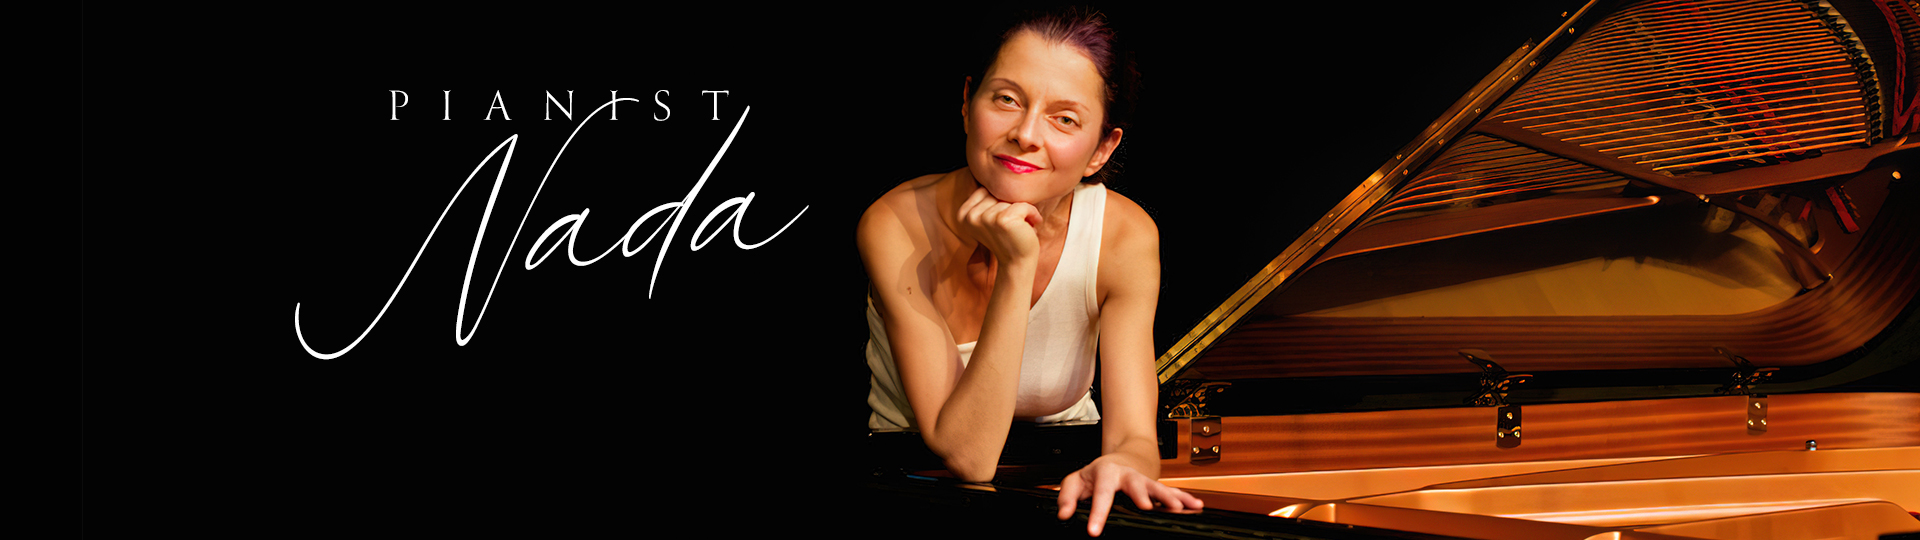 banner image photo of Pianist Nada